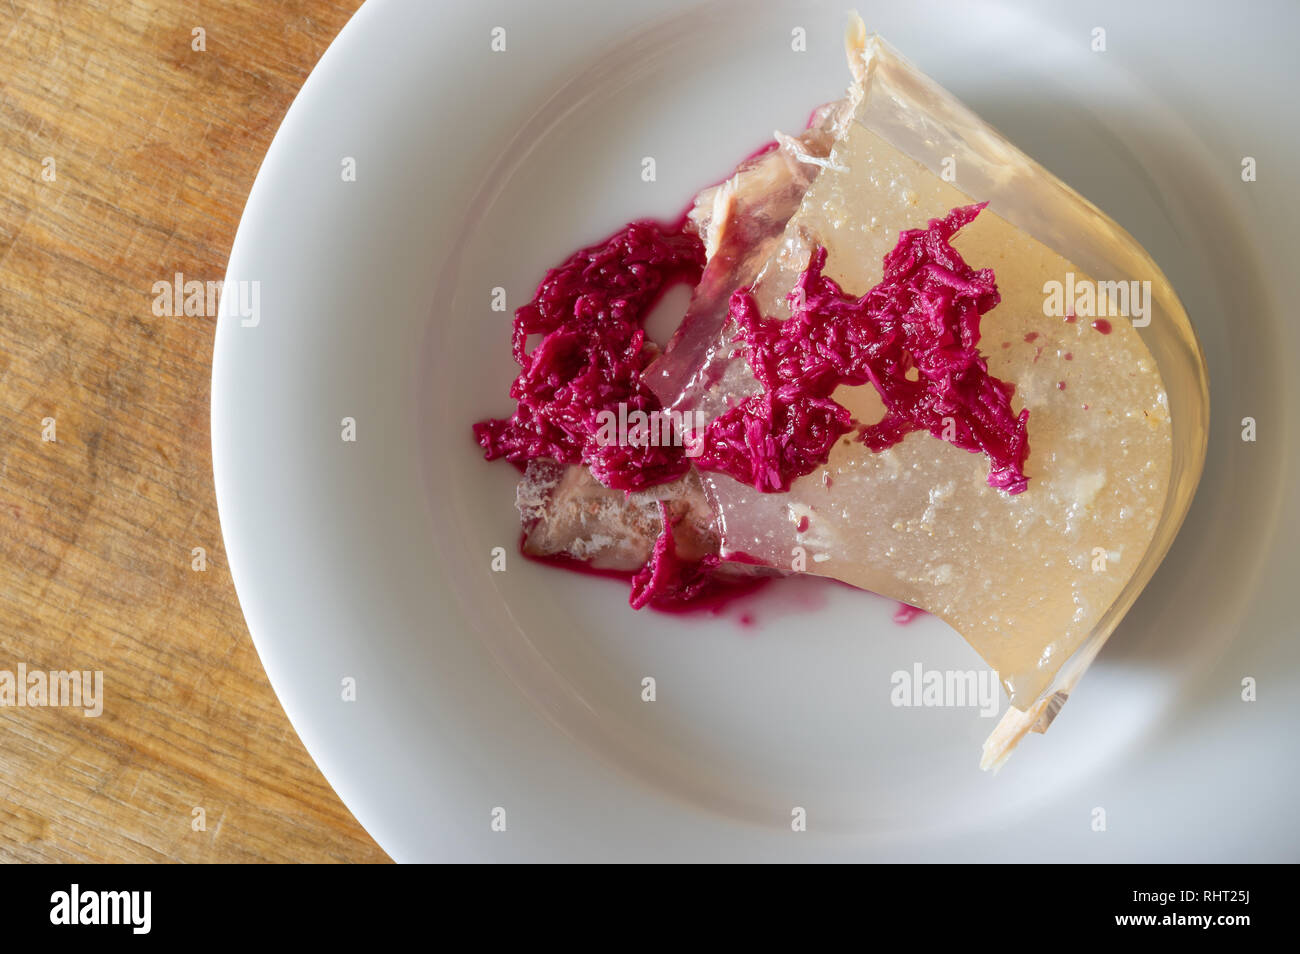 Top view on a plate with Ukrainian aspic flavoured with horse-radish pickled in beetroot juice Stock Photo